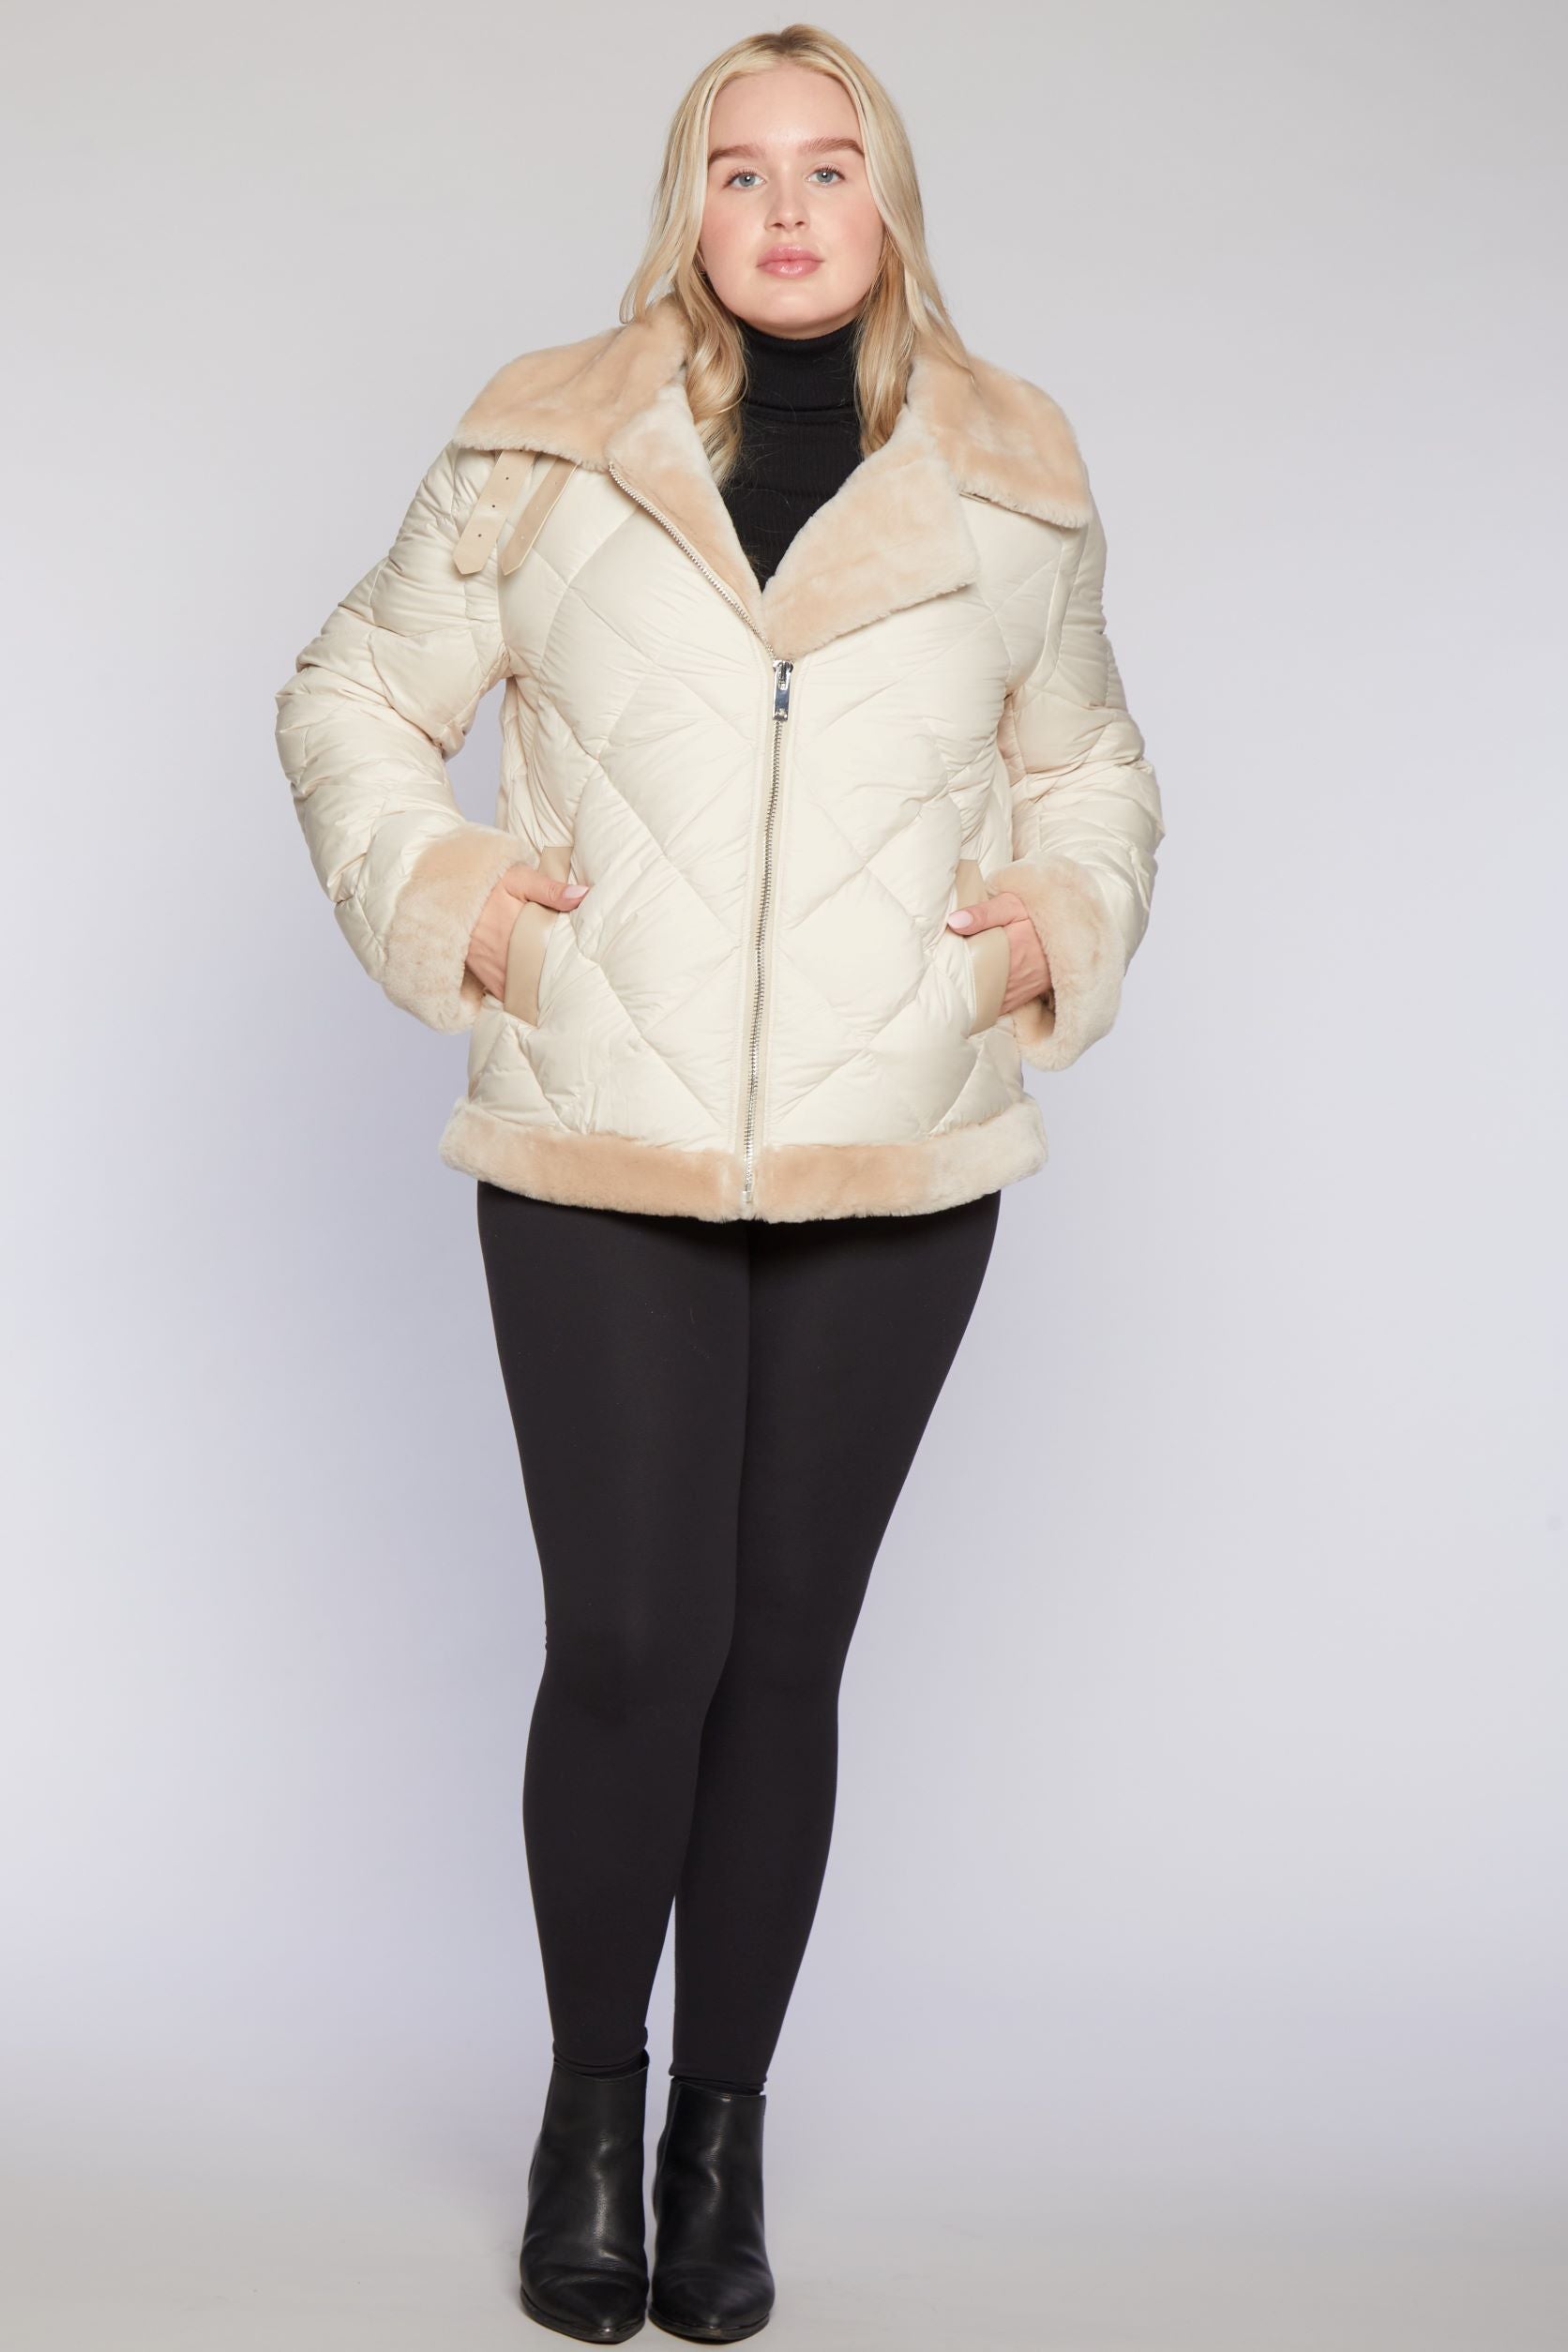 Flocked Trimmed Quilted in Flite Jacket Puffer Lamb